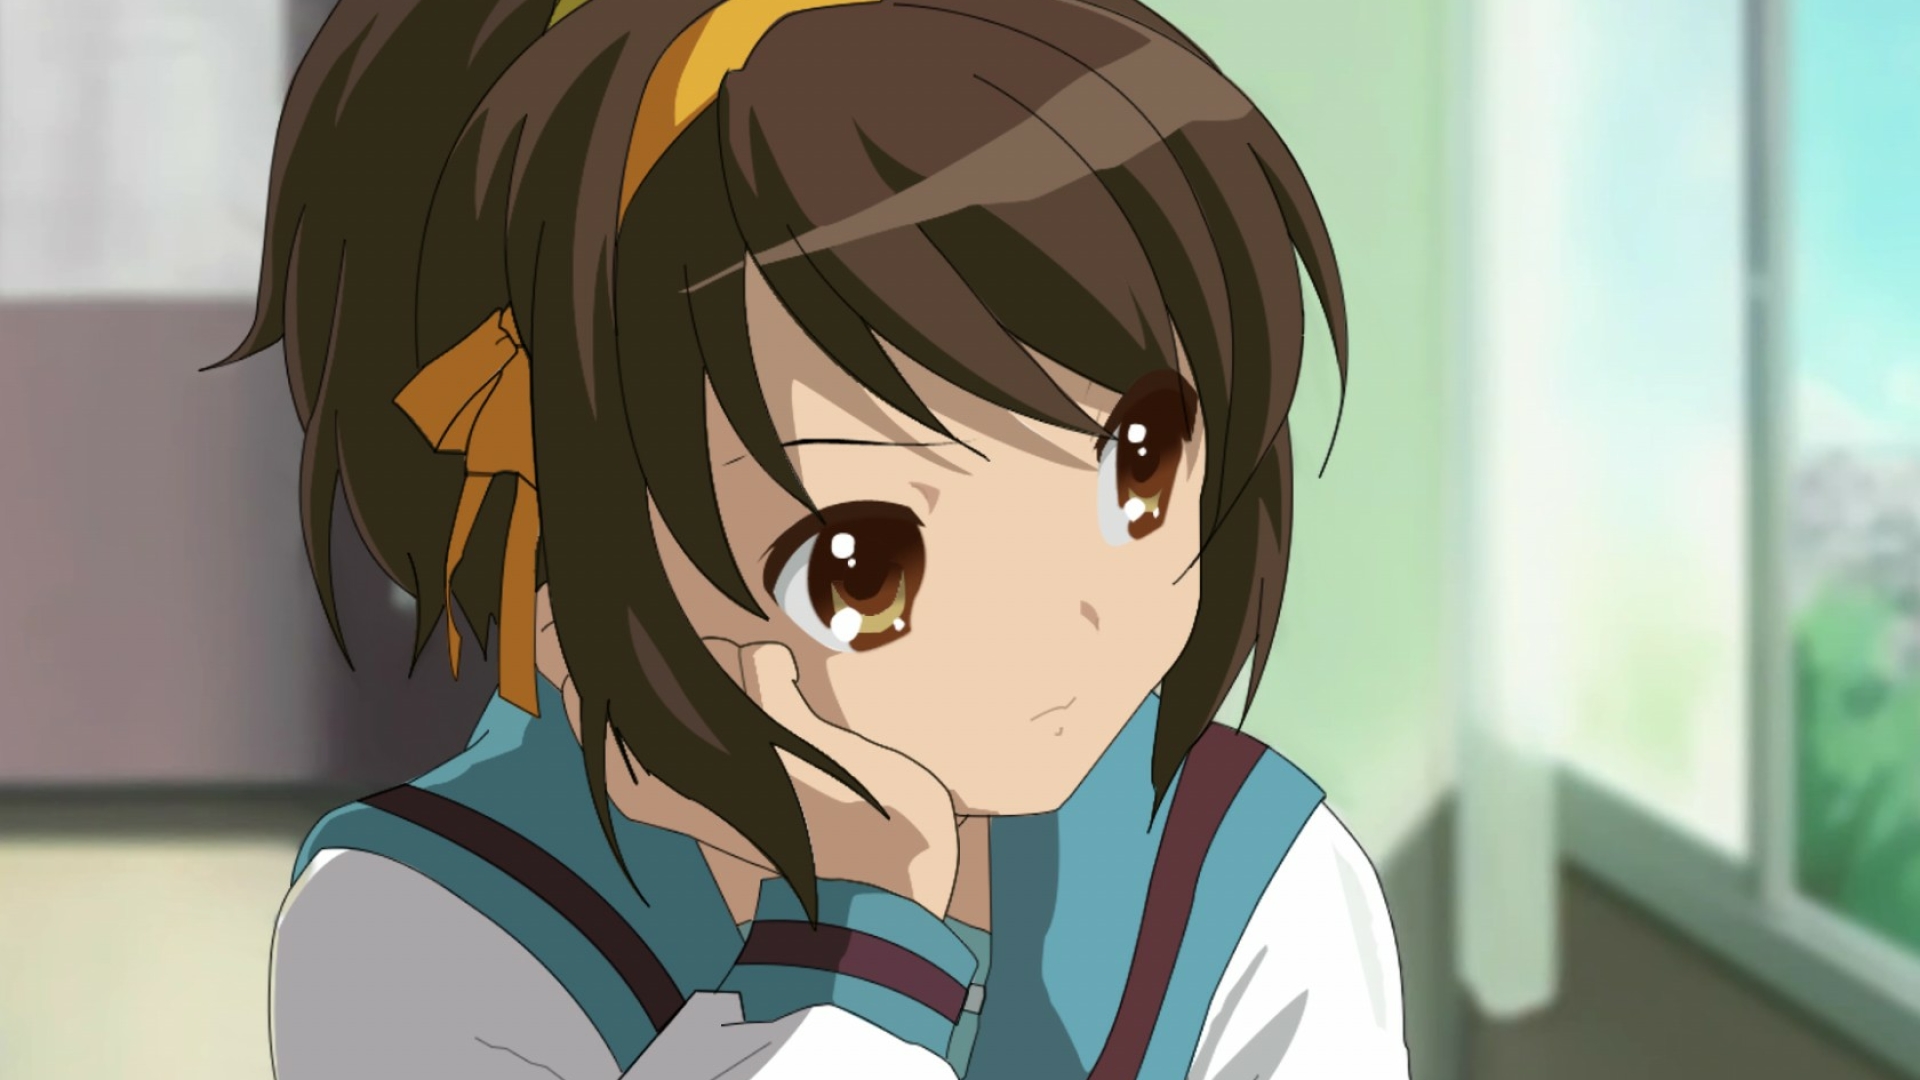 The Endless eight 15,532-time loop in Haruhi Suzumiya was painful